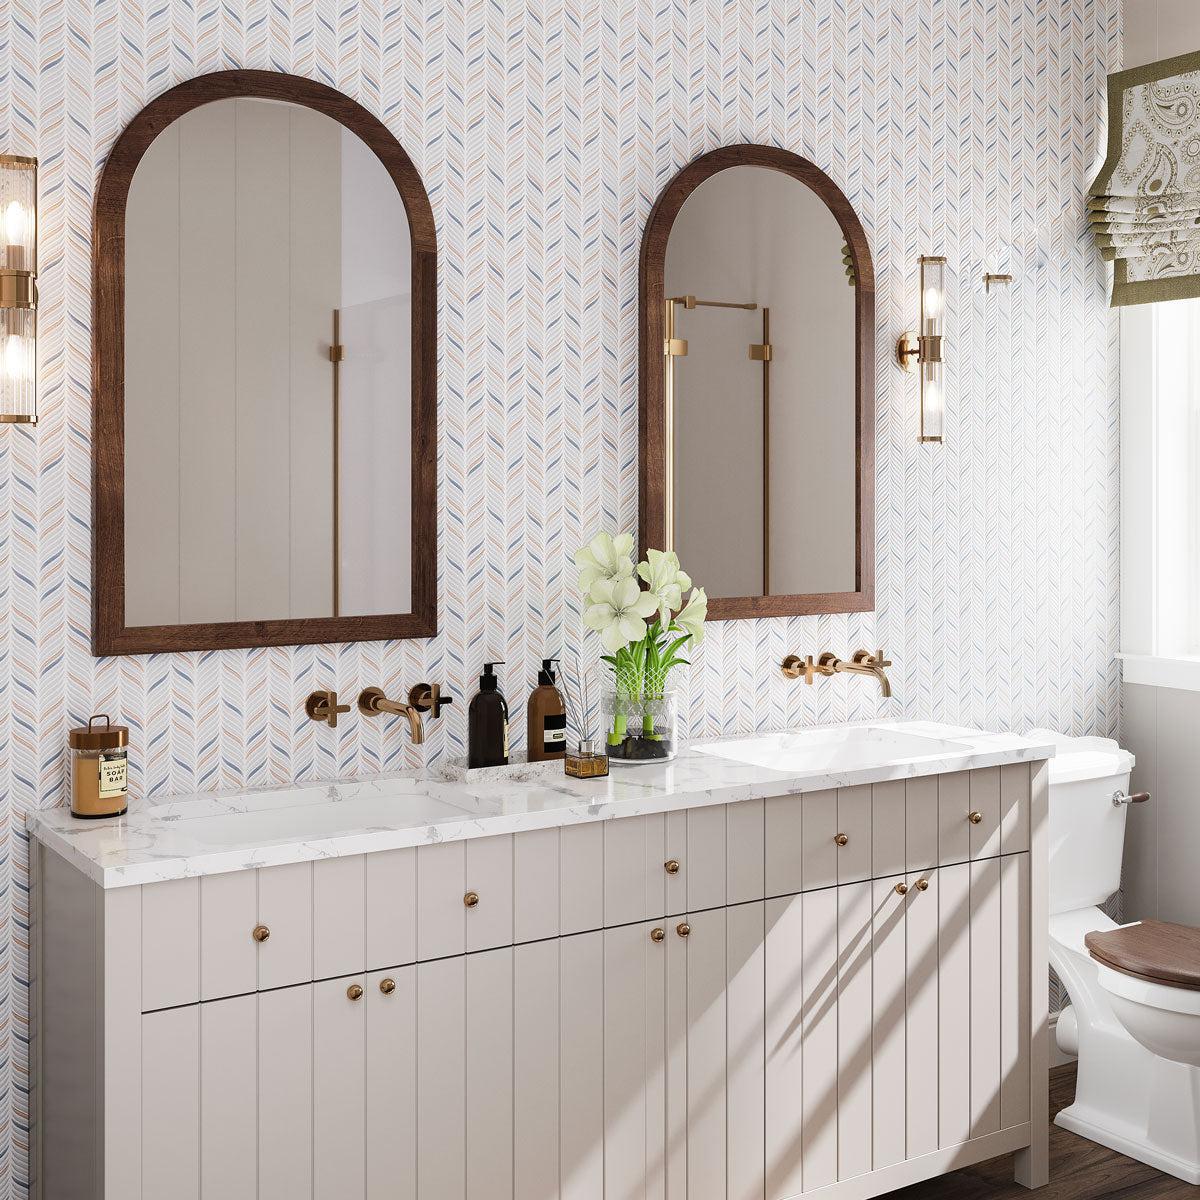 Farmhouse cottage bathroom with patterned ceramic wall tile